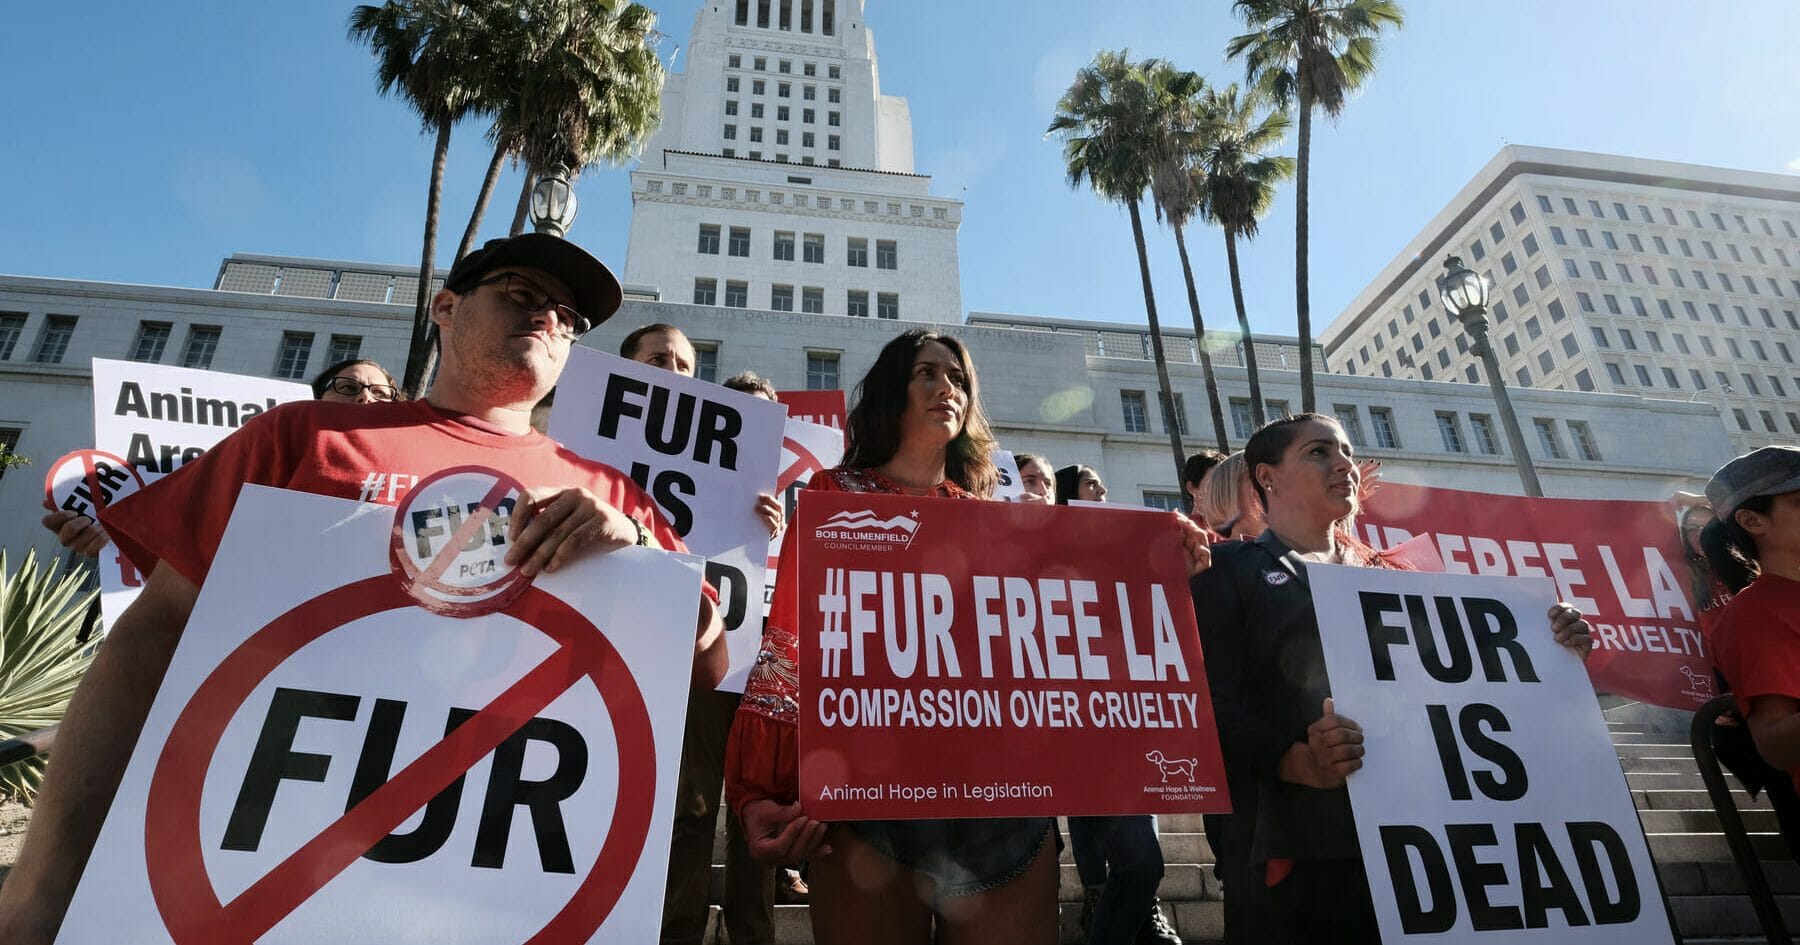 Protesters from PETA hold signs to ban fur outside City Hall in Los Angeles on Sept. 18, 2018.